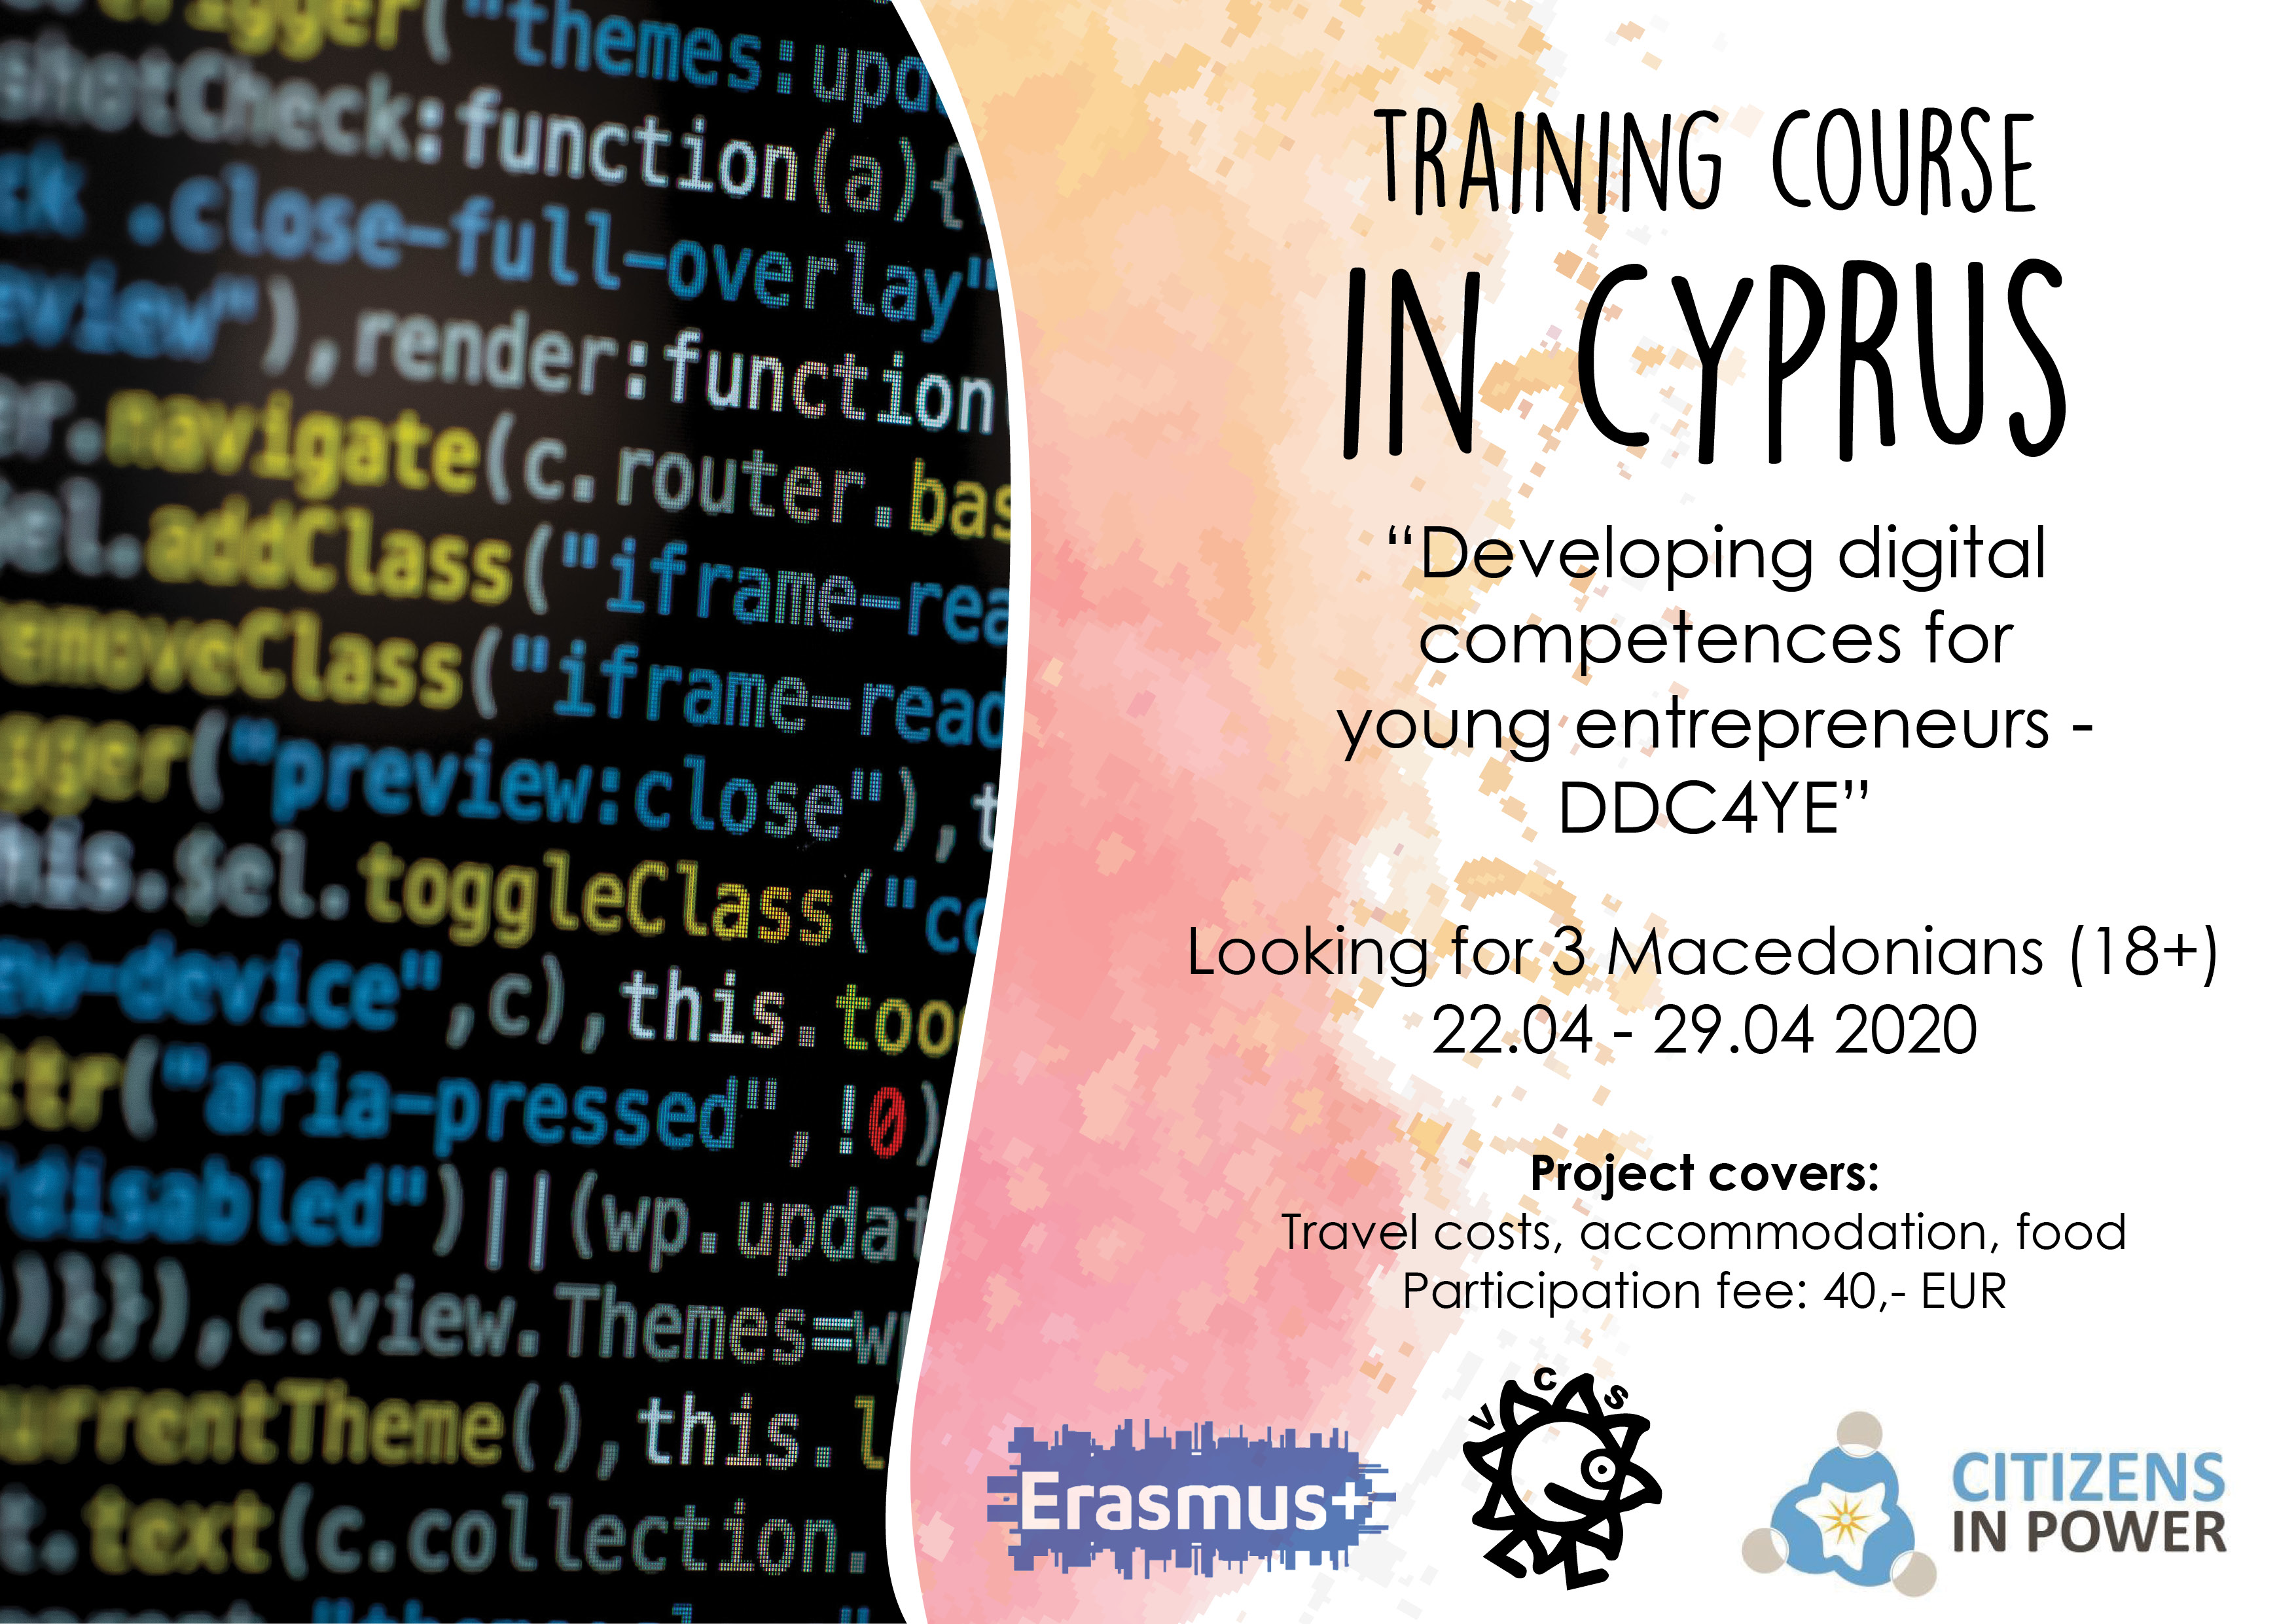 You are currently viewing Call for participants for Training Course in Cyprus!